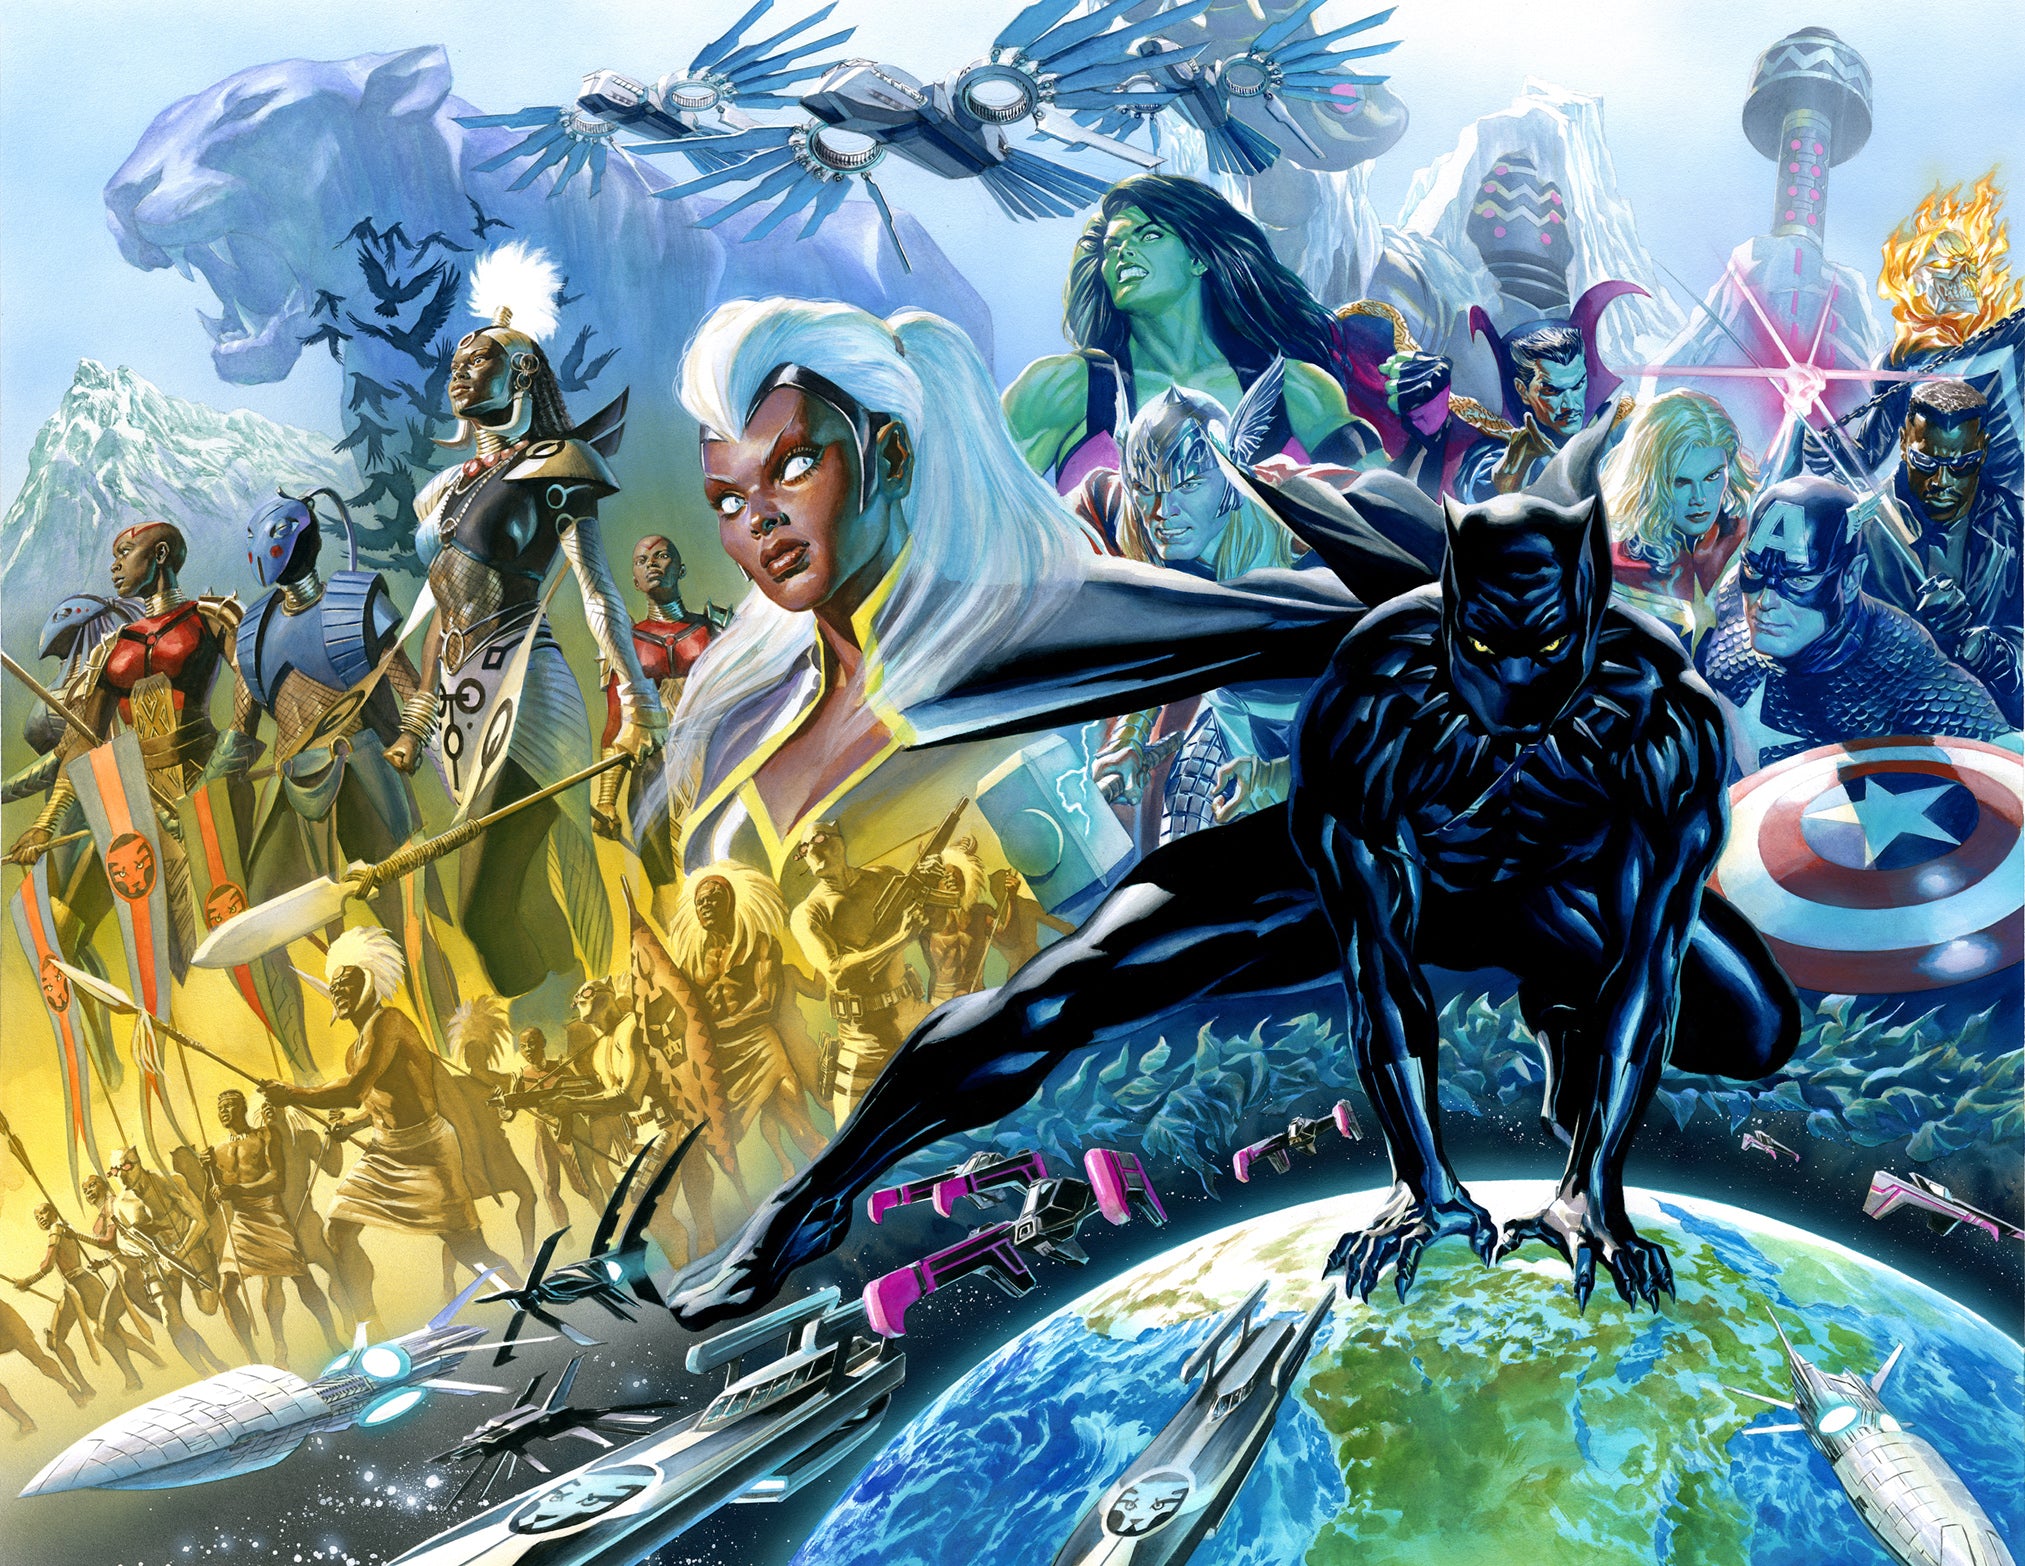 Wakanda Forever by Alex Ross.  "Wakanda Forever” depicts Black Panther leading a pantheon of Marvel Heroes. It was originally created as a cover for Black Panther Volume 8 #1.